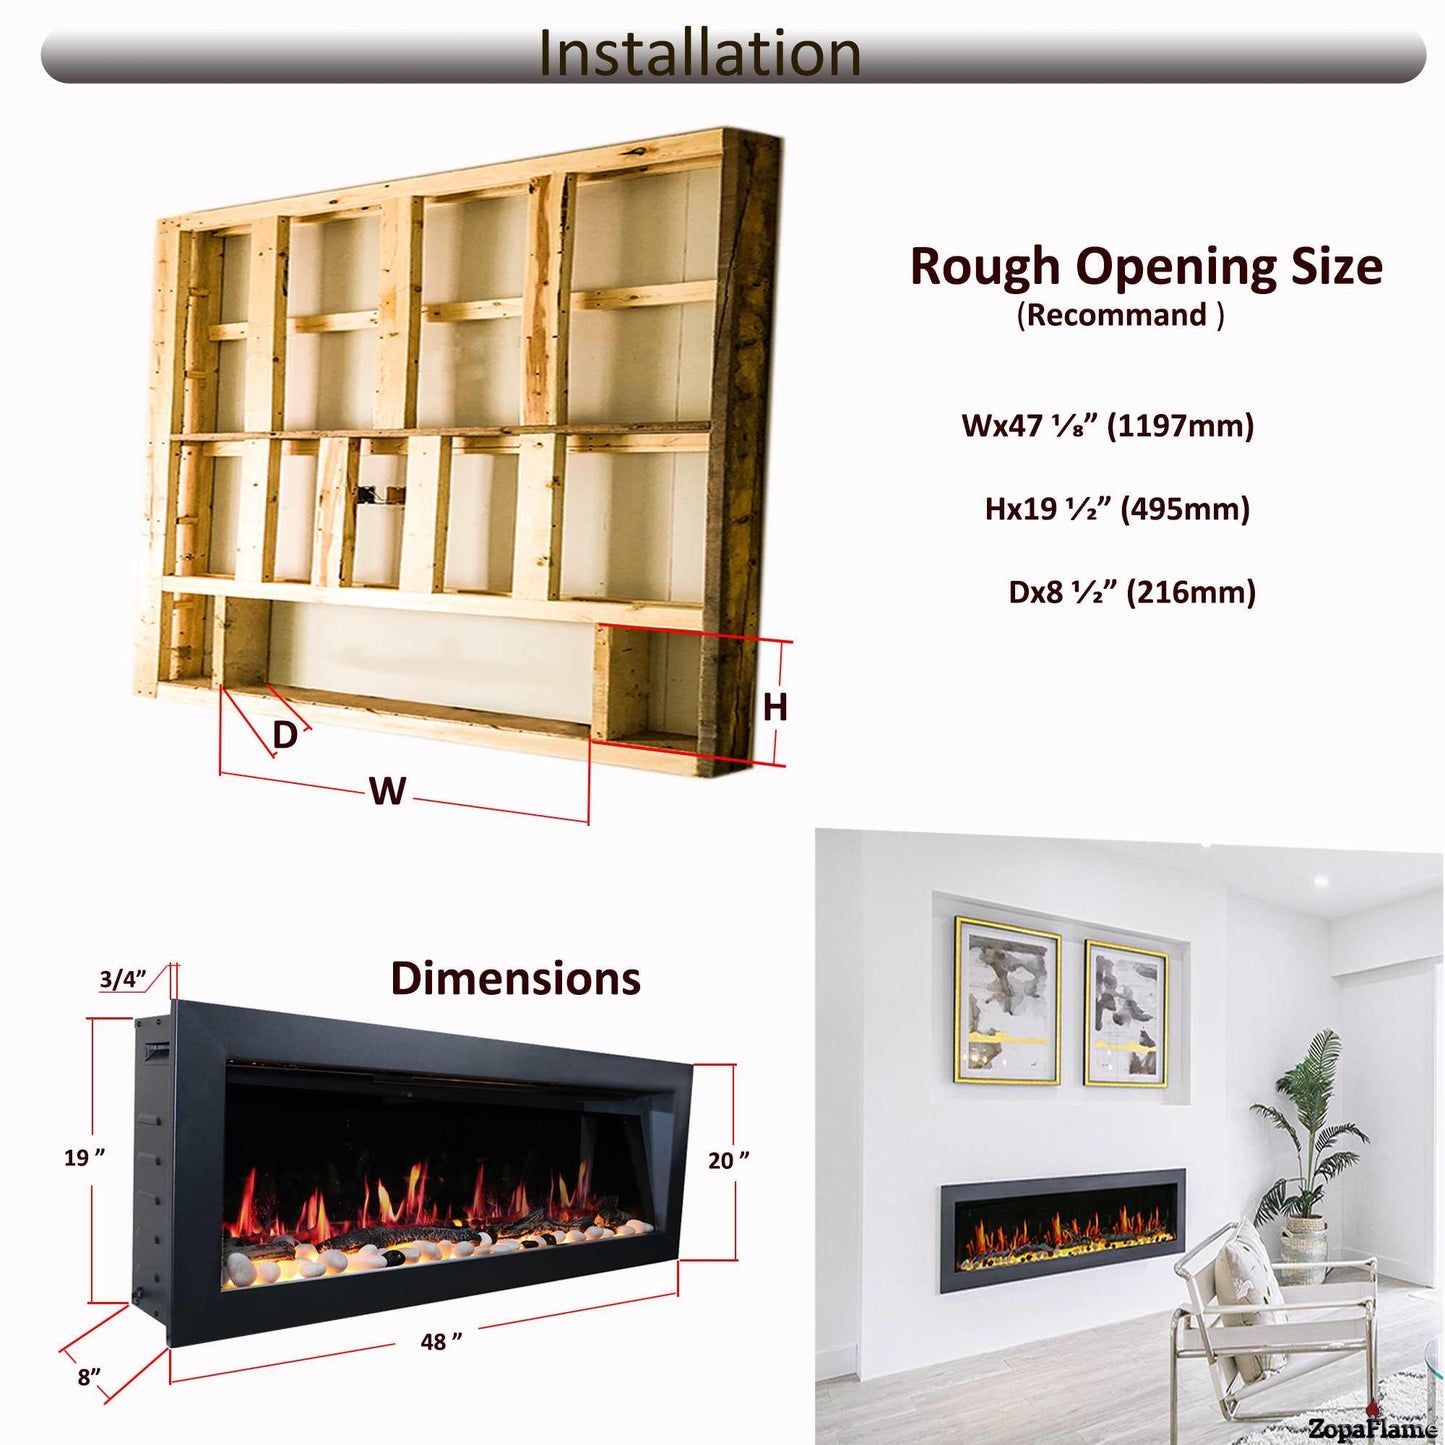 ZopaFlame™ 68" Linear Wall-mount Electric Fireplace - BP19688V - ZopaFlame Fireplaces